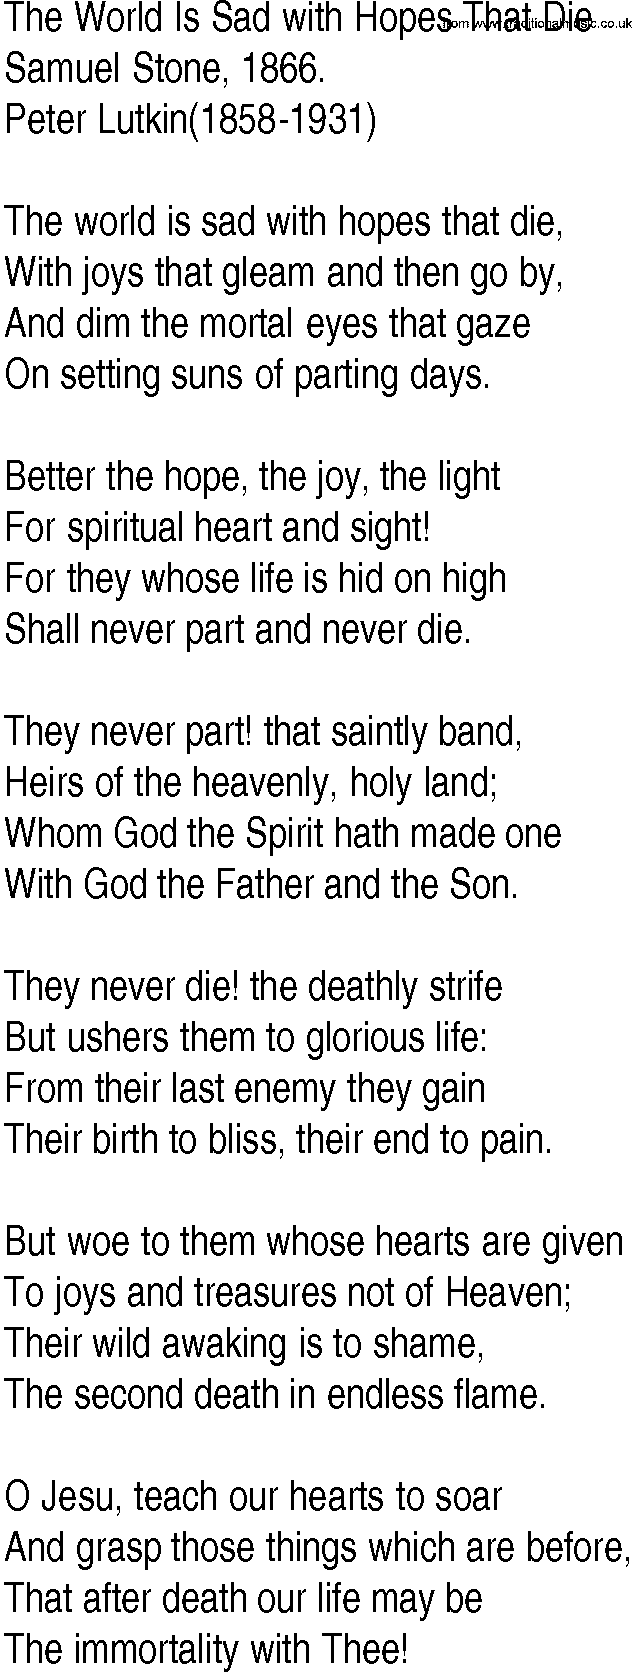 Hymn and Gospel Song: The World Is Sad with Hopes That Die by Samuel Stone lyrics